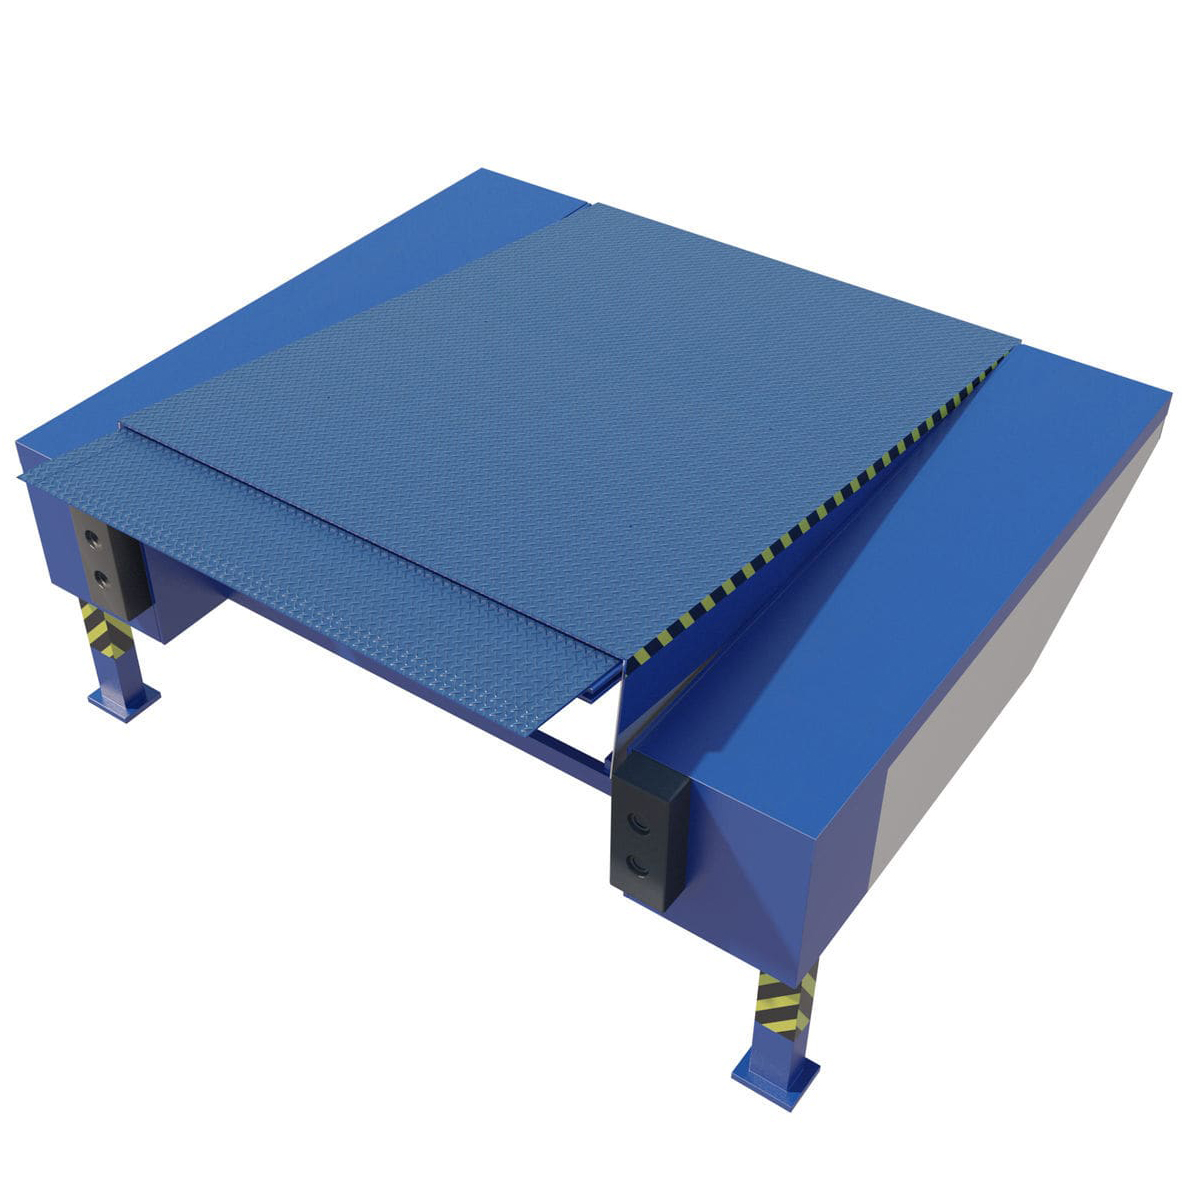 Highly Customised Top selling High quality mechanical hydraulic loading dock leveler With Safety Structure